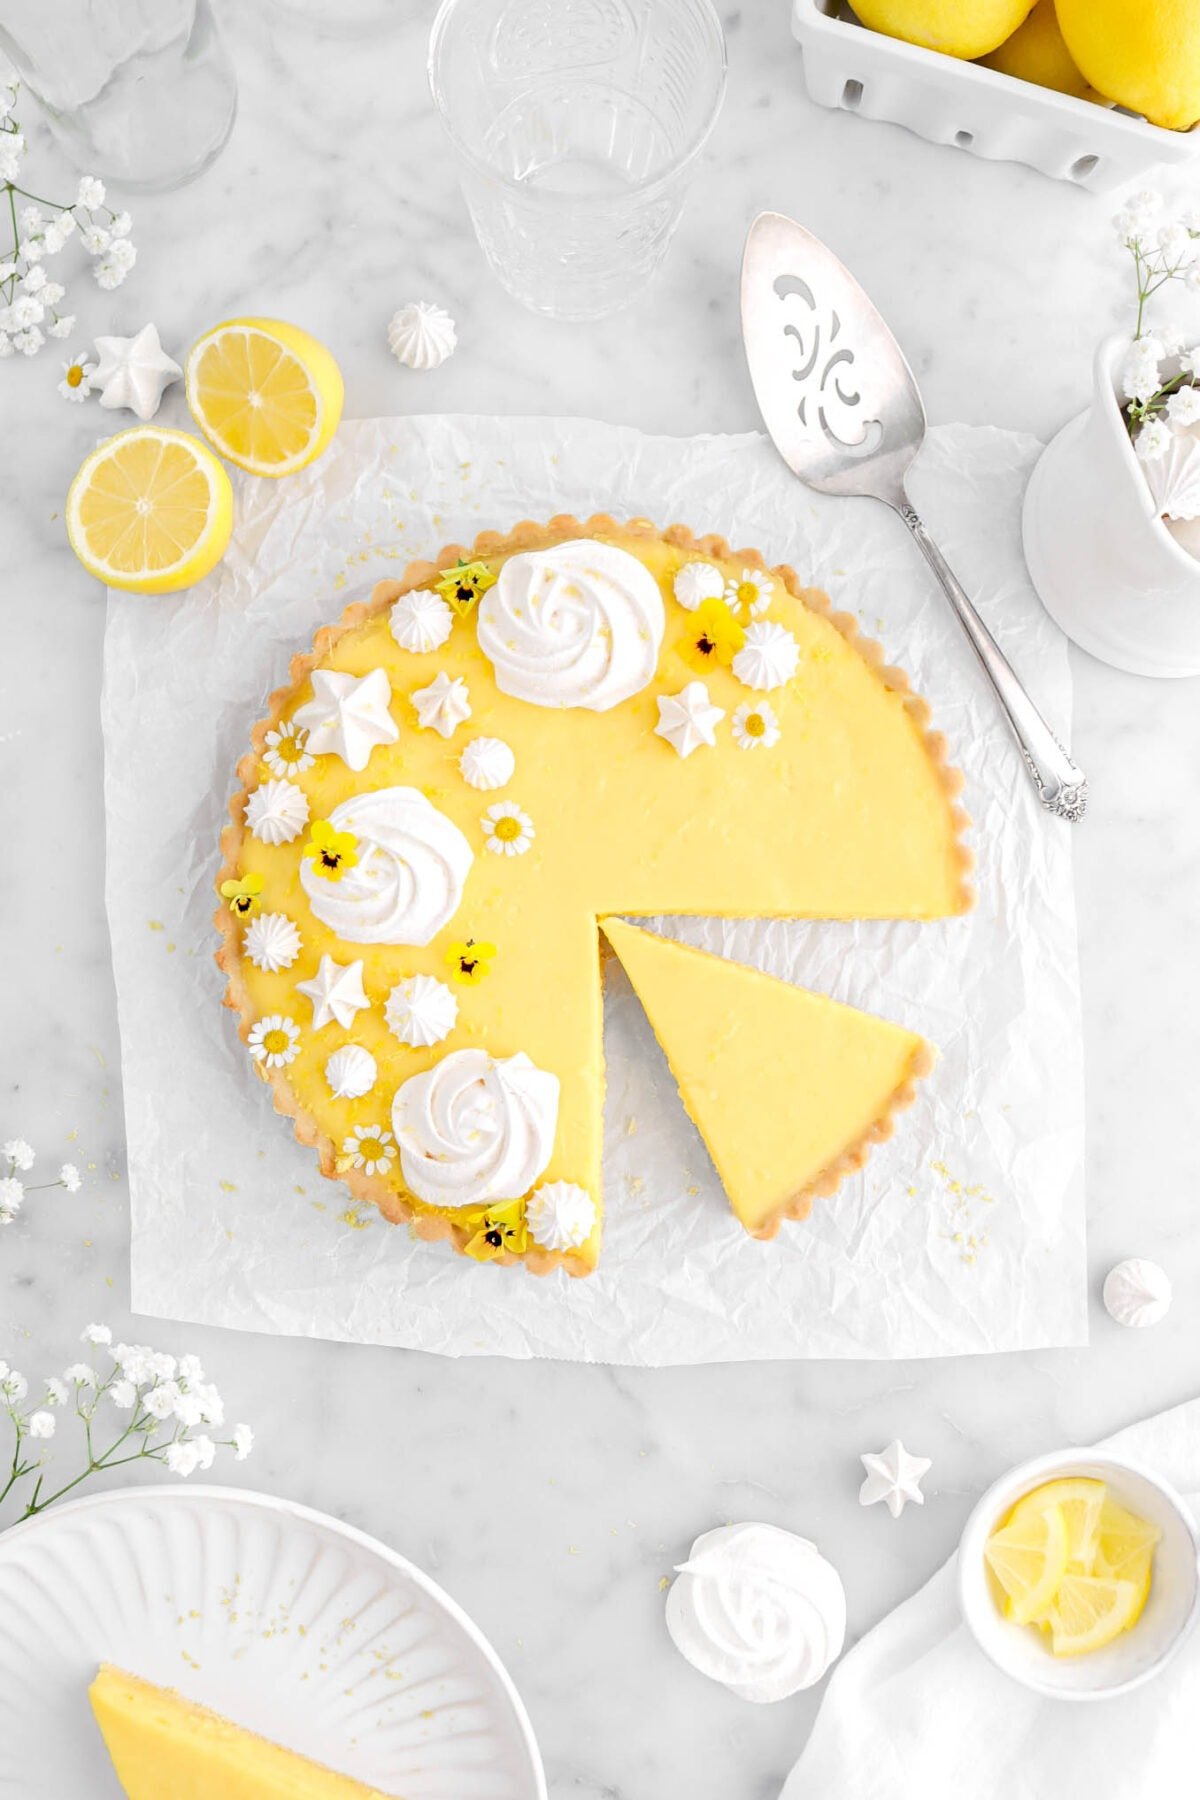 lemon tart on square piece of parchment paper with slice cut into tart with meringue cookies and flowers on top, with lemons and white flowers around.